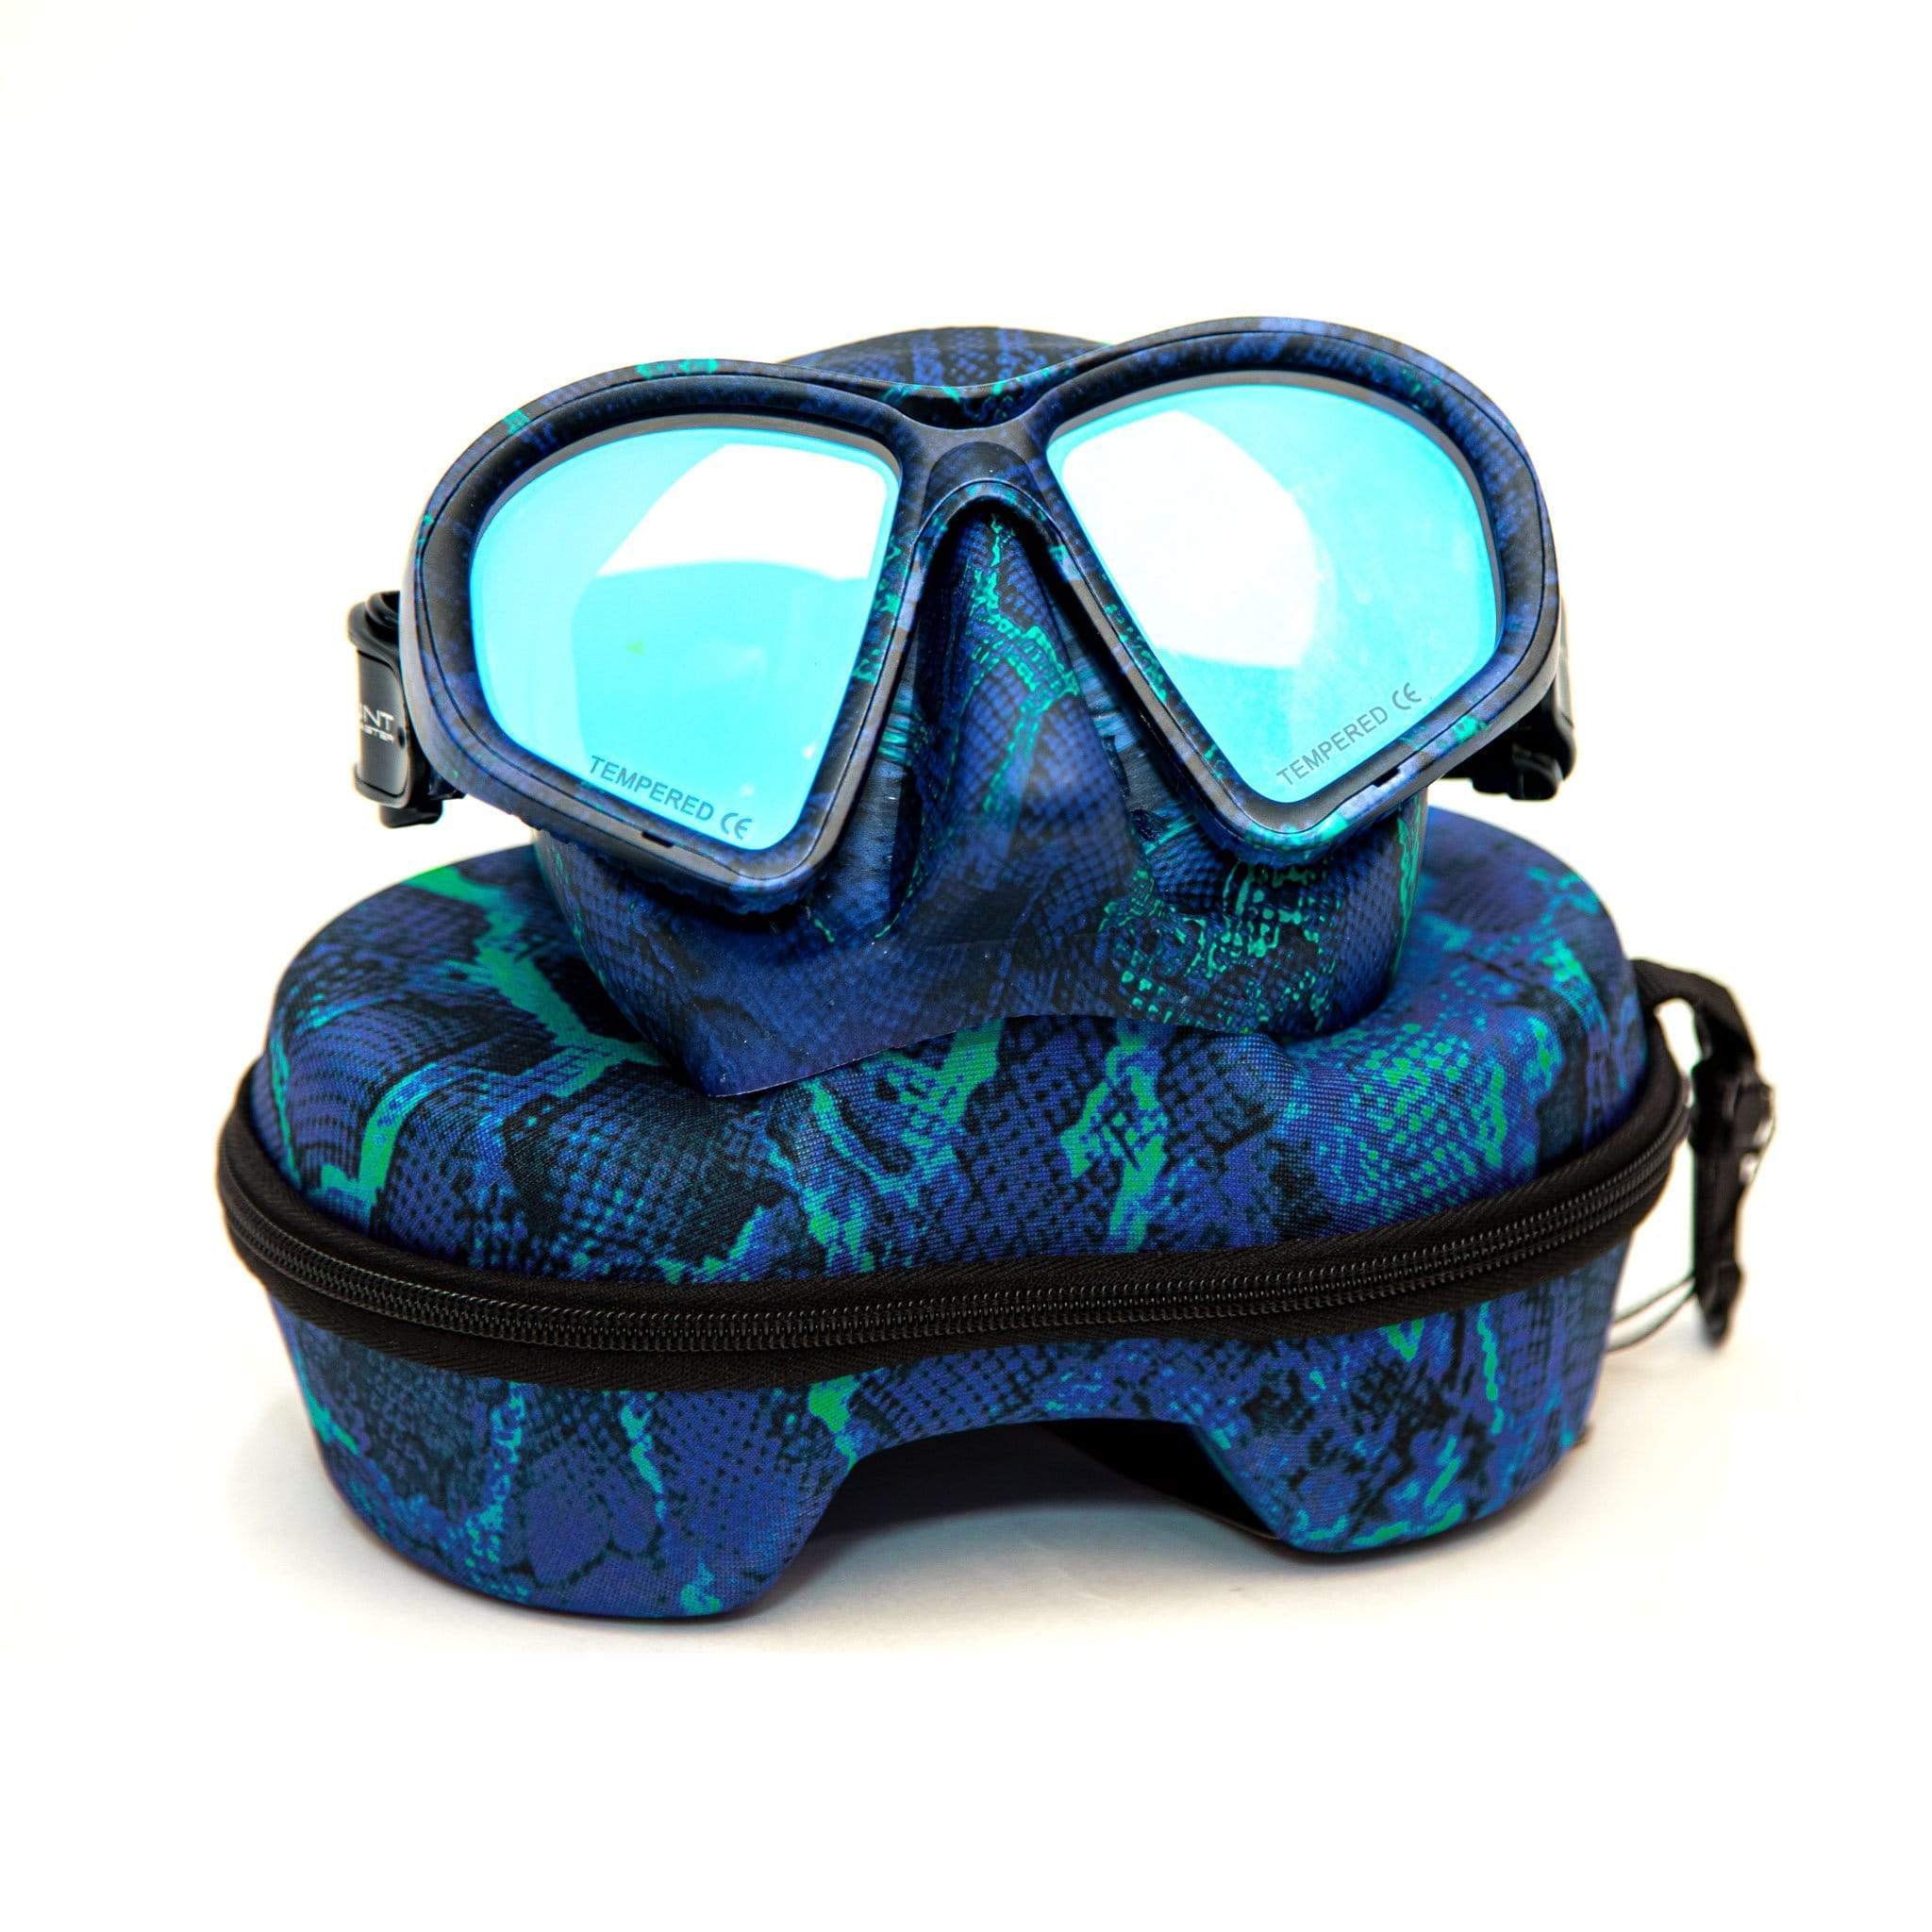 HuntMaster Blue Harbinger Camo Diving Mask- With Matching Camo Container (Blue)